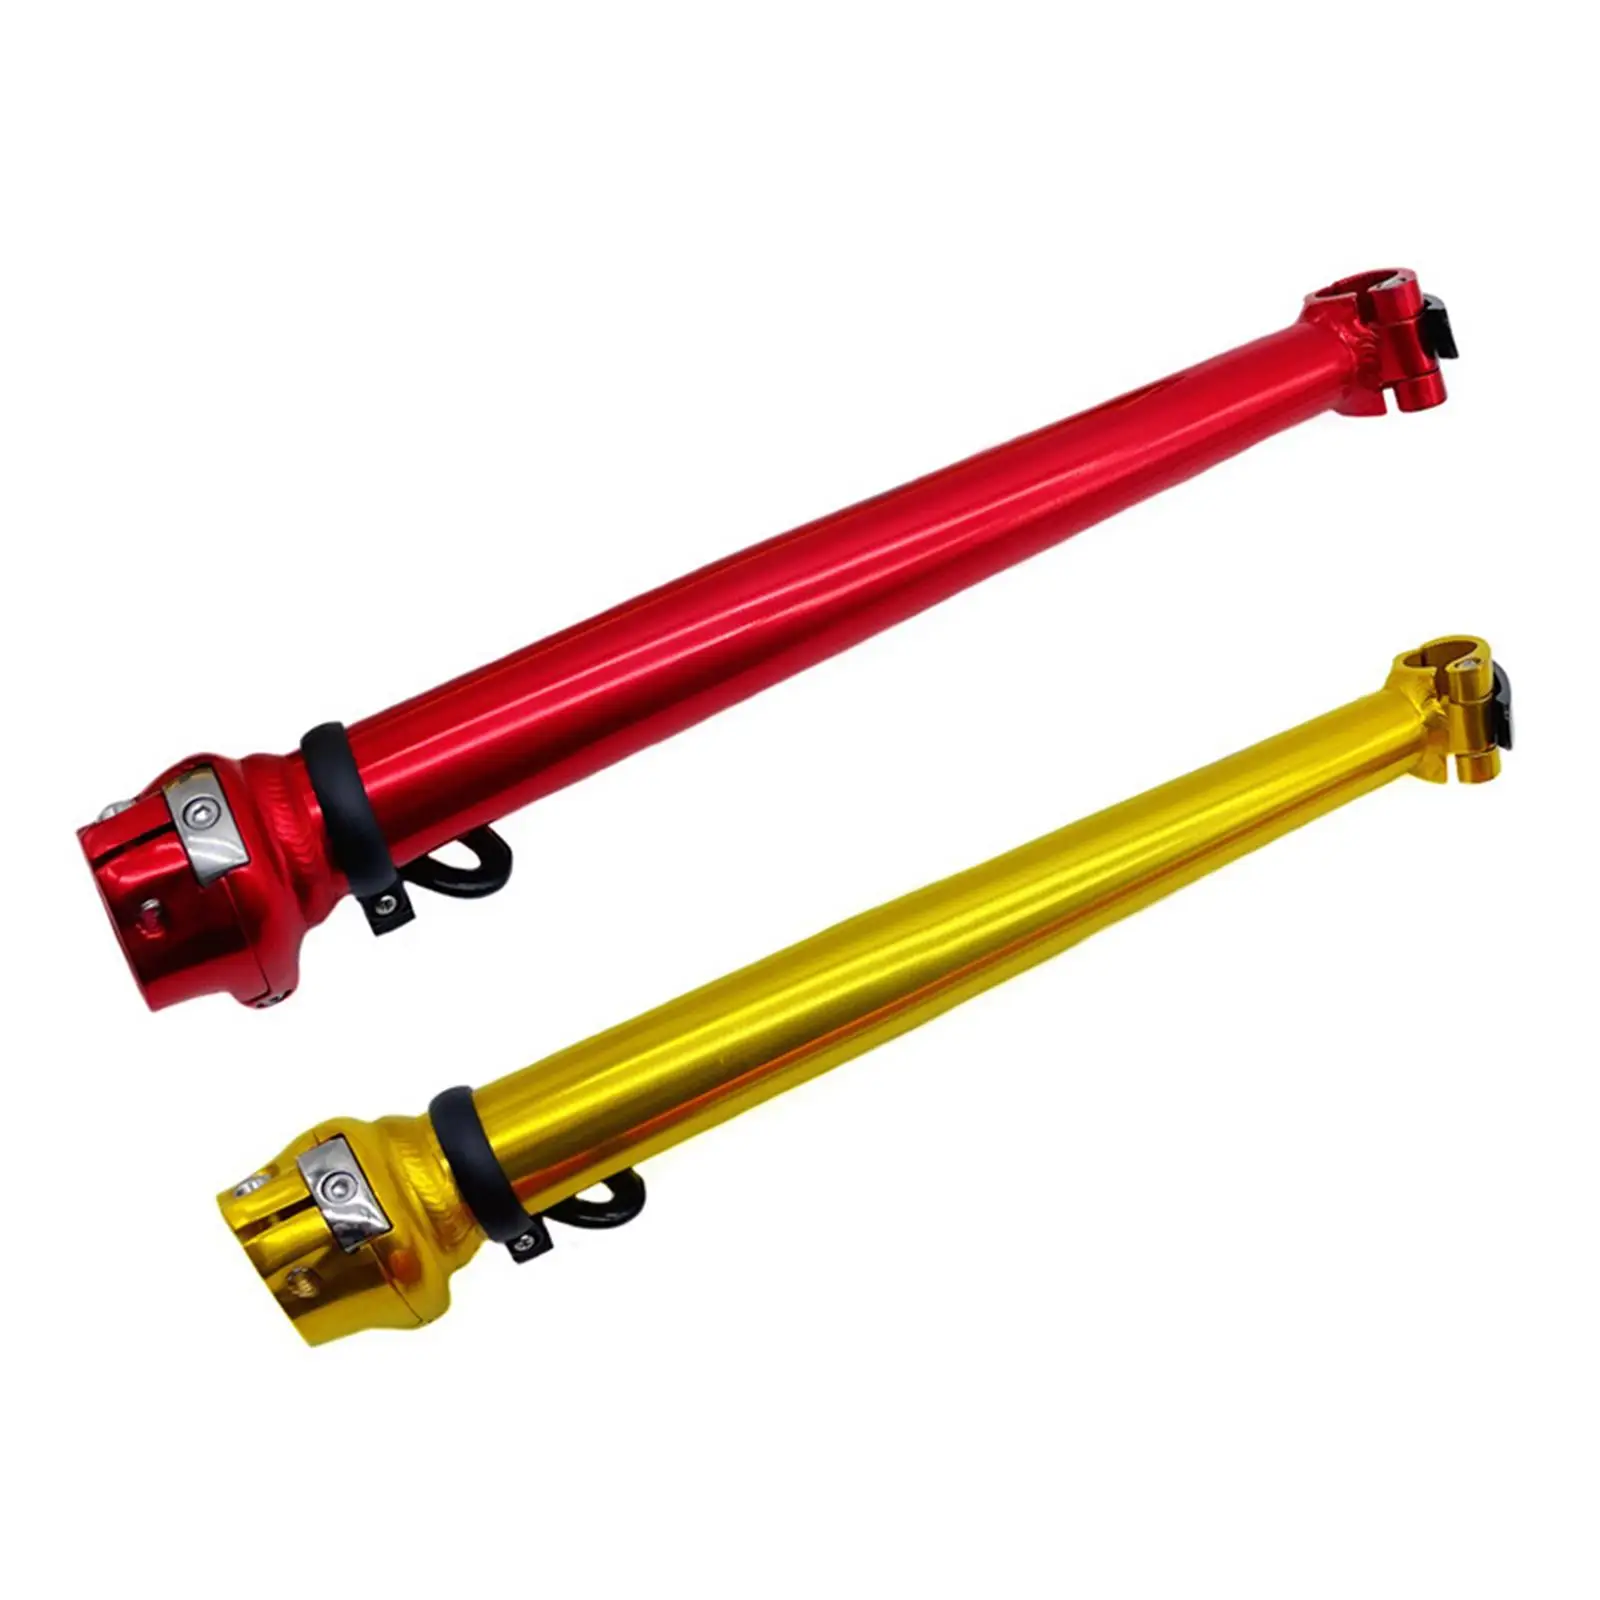 Adjustable Folding Bicycle Handle Bar Stem, Integrated Head Tube, Quick Release Accessories